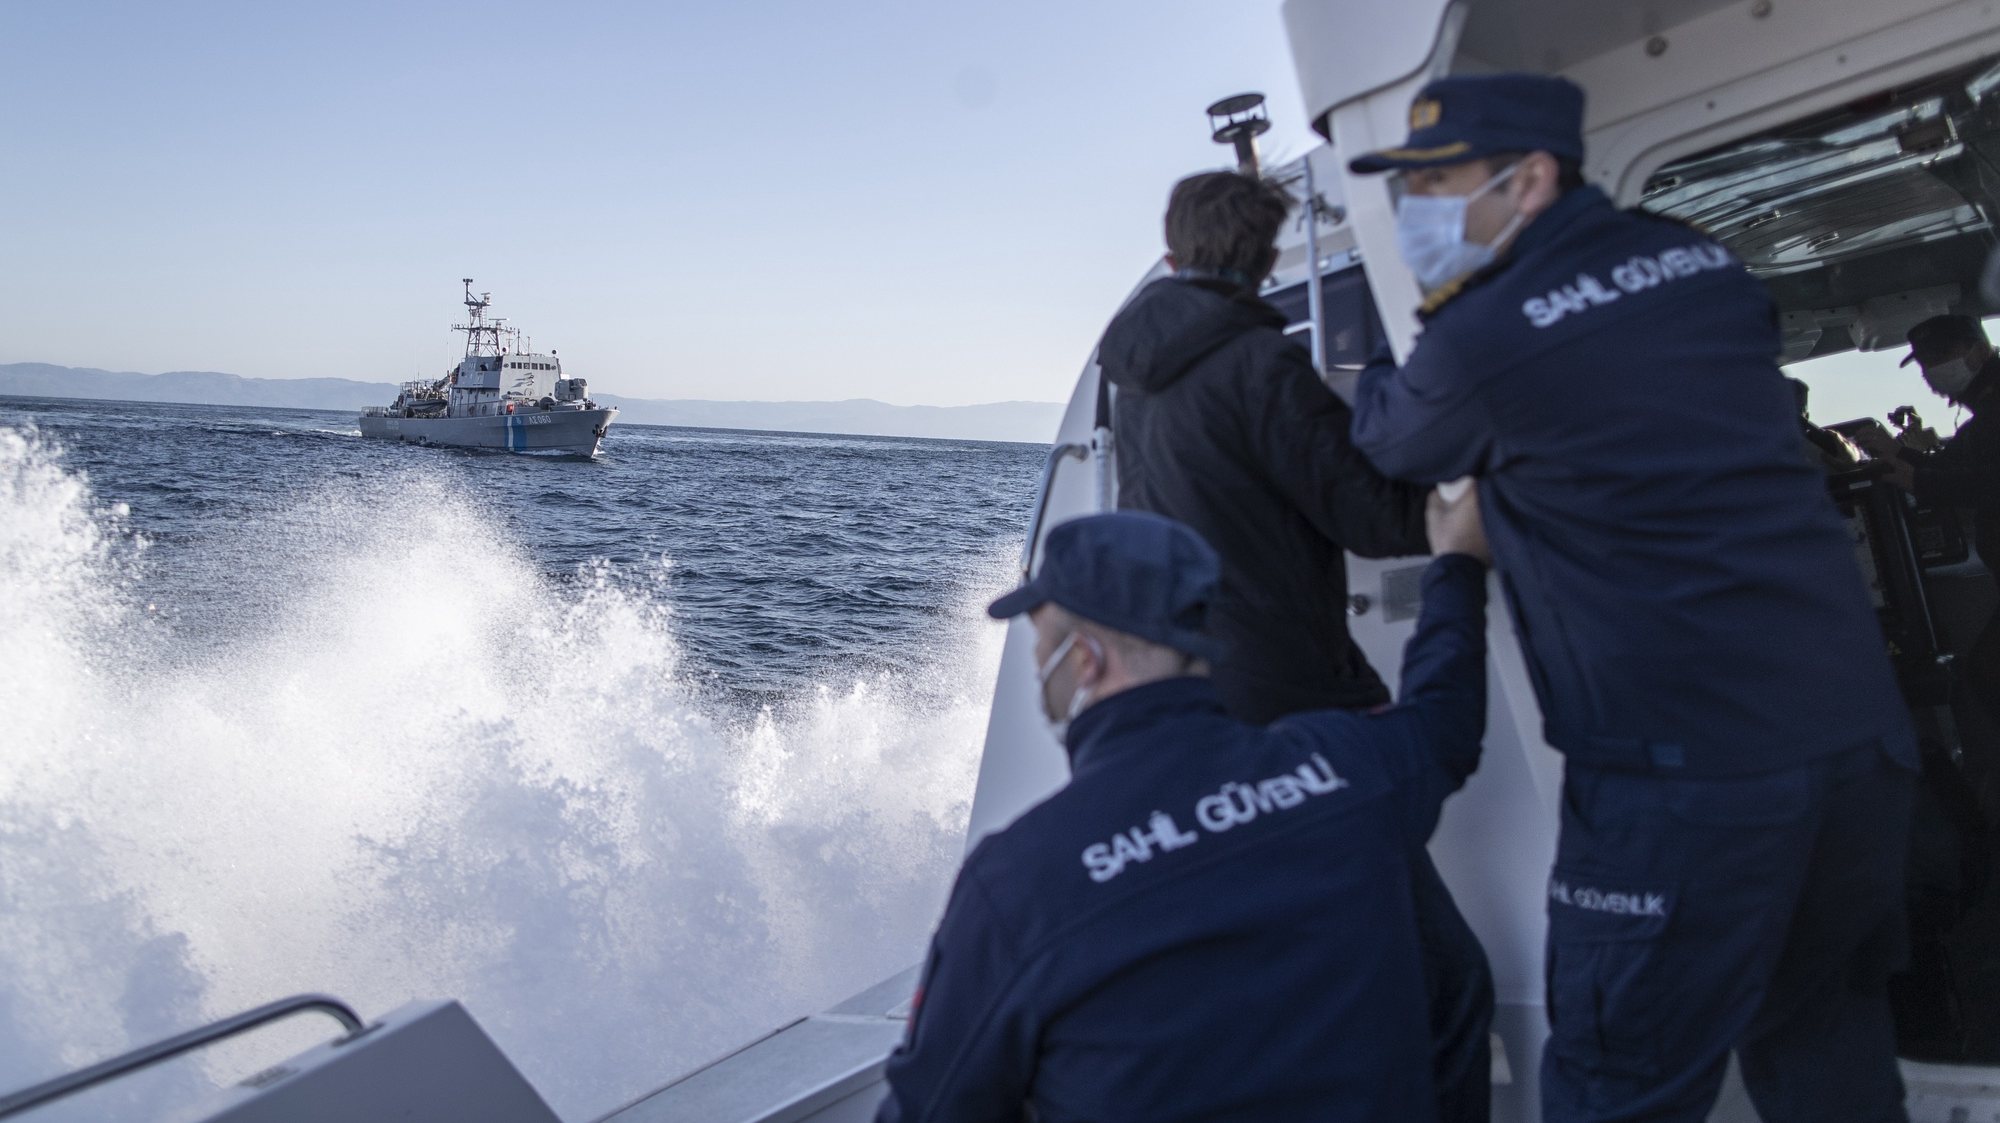 epa09131071 Members of the Turkish Coast Guard give a warning to a Greece Coast Guard ship, which allegedly crossed into Turkish waters, during a patrol to search and rescue for migrants as they pass to or pushed back from Lesvos Island of Greece offshore the Ayvalik district in Balikesir, Turkey, 10 April 2021 (issued 12 April 2012). The Greek island of Lesbos hosts one of the hotspots, an initial reception centers for migrants in European Union. Turkish authorities told epa/Efe that in 2020 around 45 percent of migrants rescued in the Aegean Sea had been pushed back from Greek territory. Most common cases involve migrant vessels being stopped by a Greek patrol when entering Greek waters, but the Turkish coastguard says it has heard lots of migrants describing &#039;delayed pushback,&#039; when people are returned to the sea days after they reached Lesbos. According to Turkish officials, in this case, a Greek patrol carries the detained migrants to the limit of Greek territorial waters before putting them in a life raft and alerting Ankara.  Since the beginning of 2021, Turkey has rescued around 2,700 migrants in the Aegean Sea, and some 1,900 migrants from a pushback.  The Norwegian NGO Aegean Boat Report claims, some 558 people have been abandoned on 35 life rafts at sea so far in 2021. Some such incidents have ended with fatalities, the organizations claimed.  EPA/ERDEM SAHIN  ATTENTION: This Image is part of a PHOTO SET